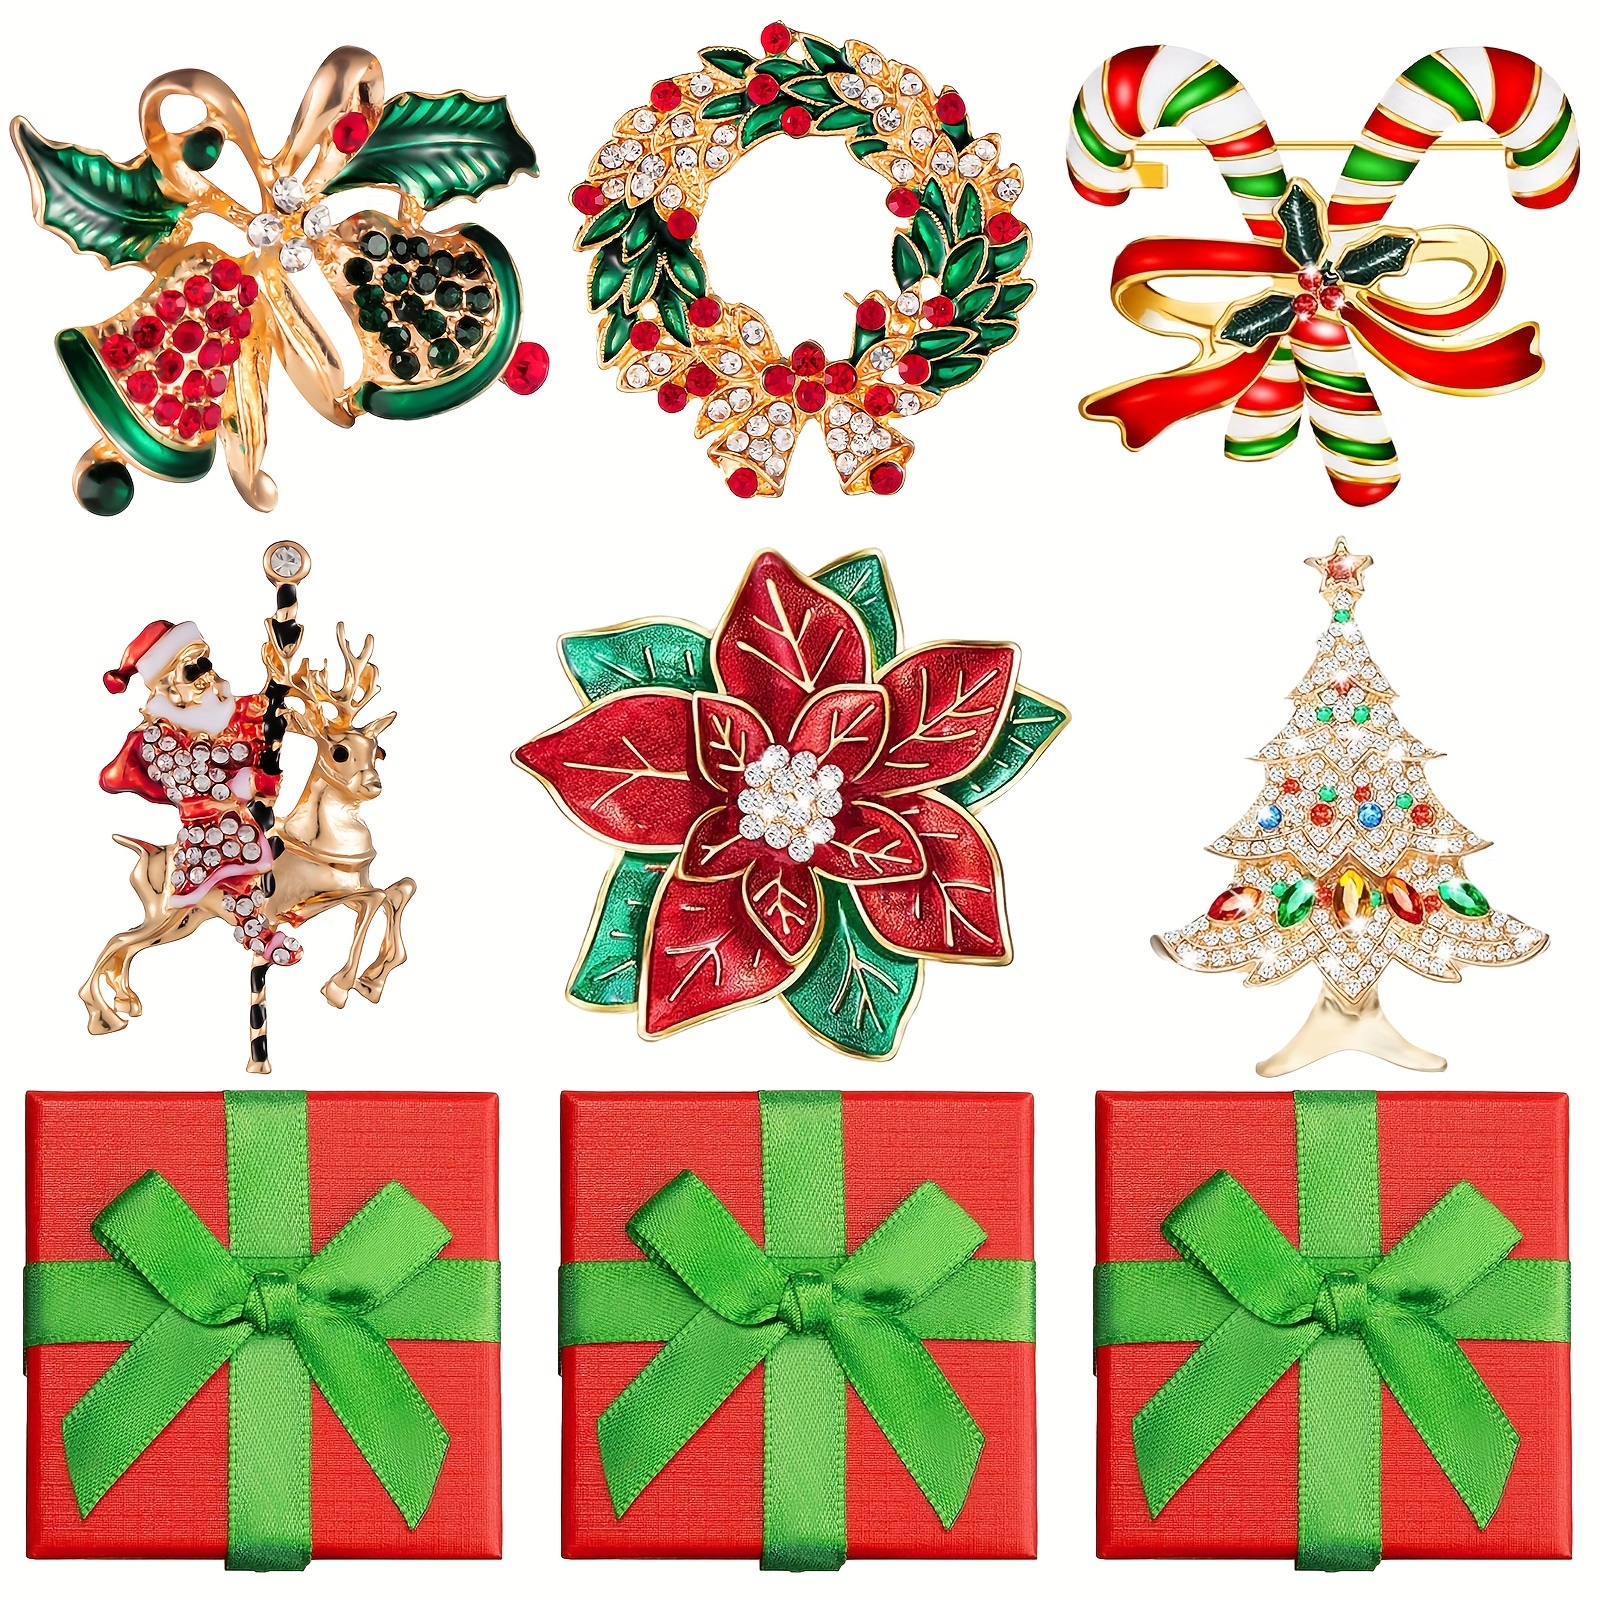 

6 Pack Christmas Brooch And Pins With Gift Box Vintage Pins Gift For Women Rhinestone Crystal Xmas Tree Candy Bell Garland Santa Claus Christmas Jewelry Gifts For Girl Women